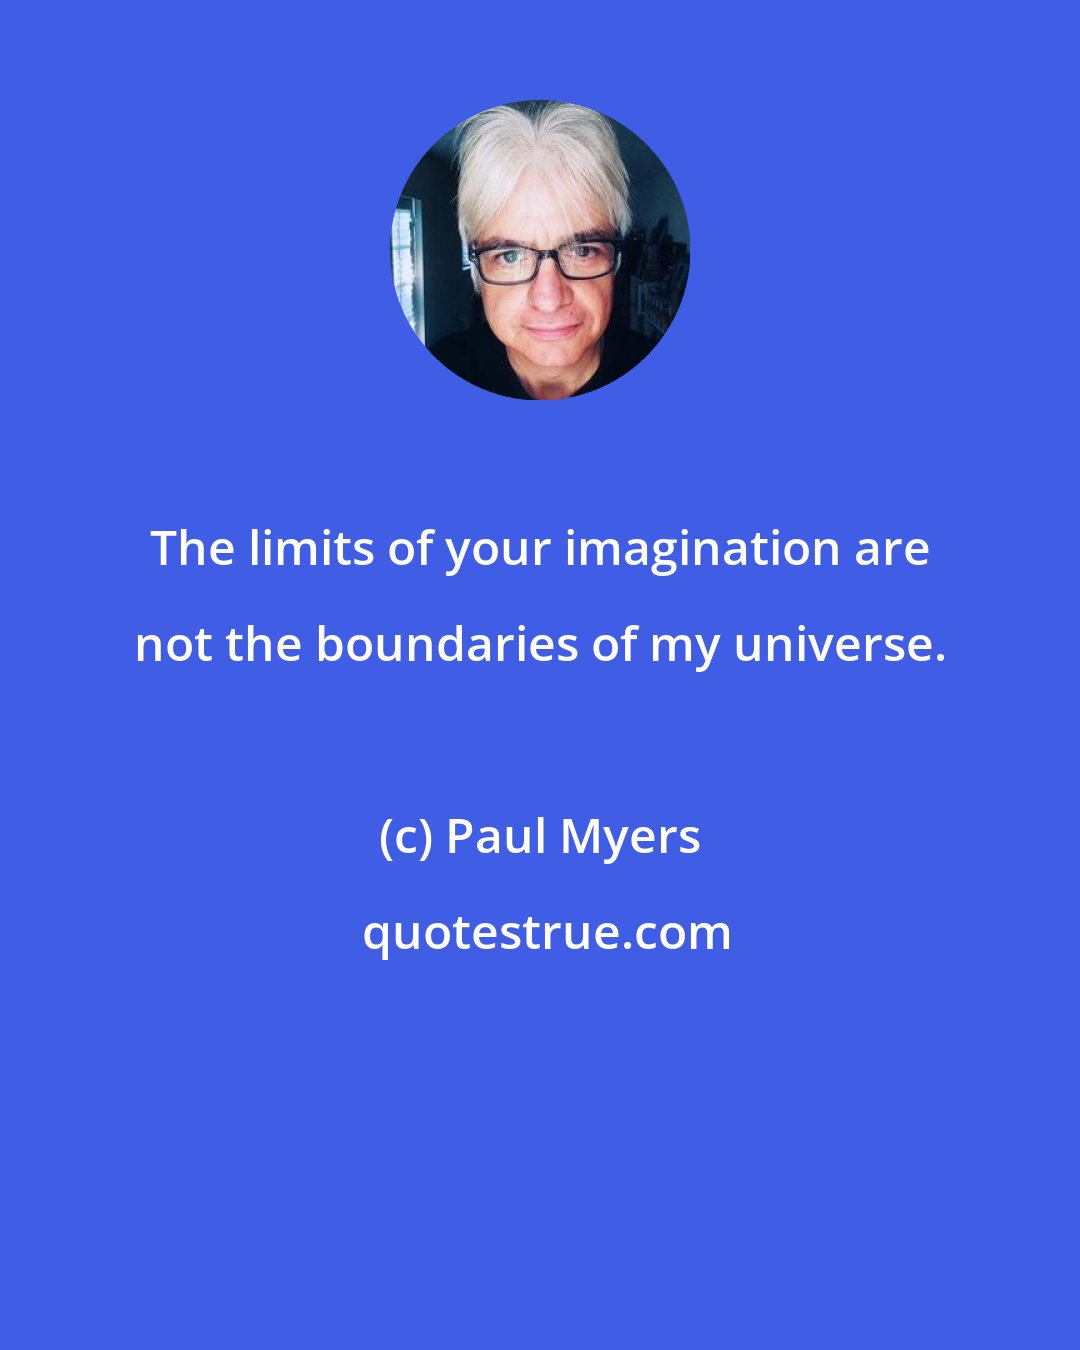 Paul Myers: The limits of your imagination are not the boundaries of my universe.